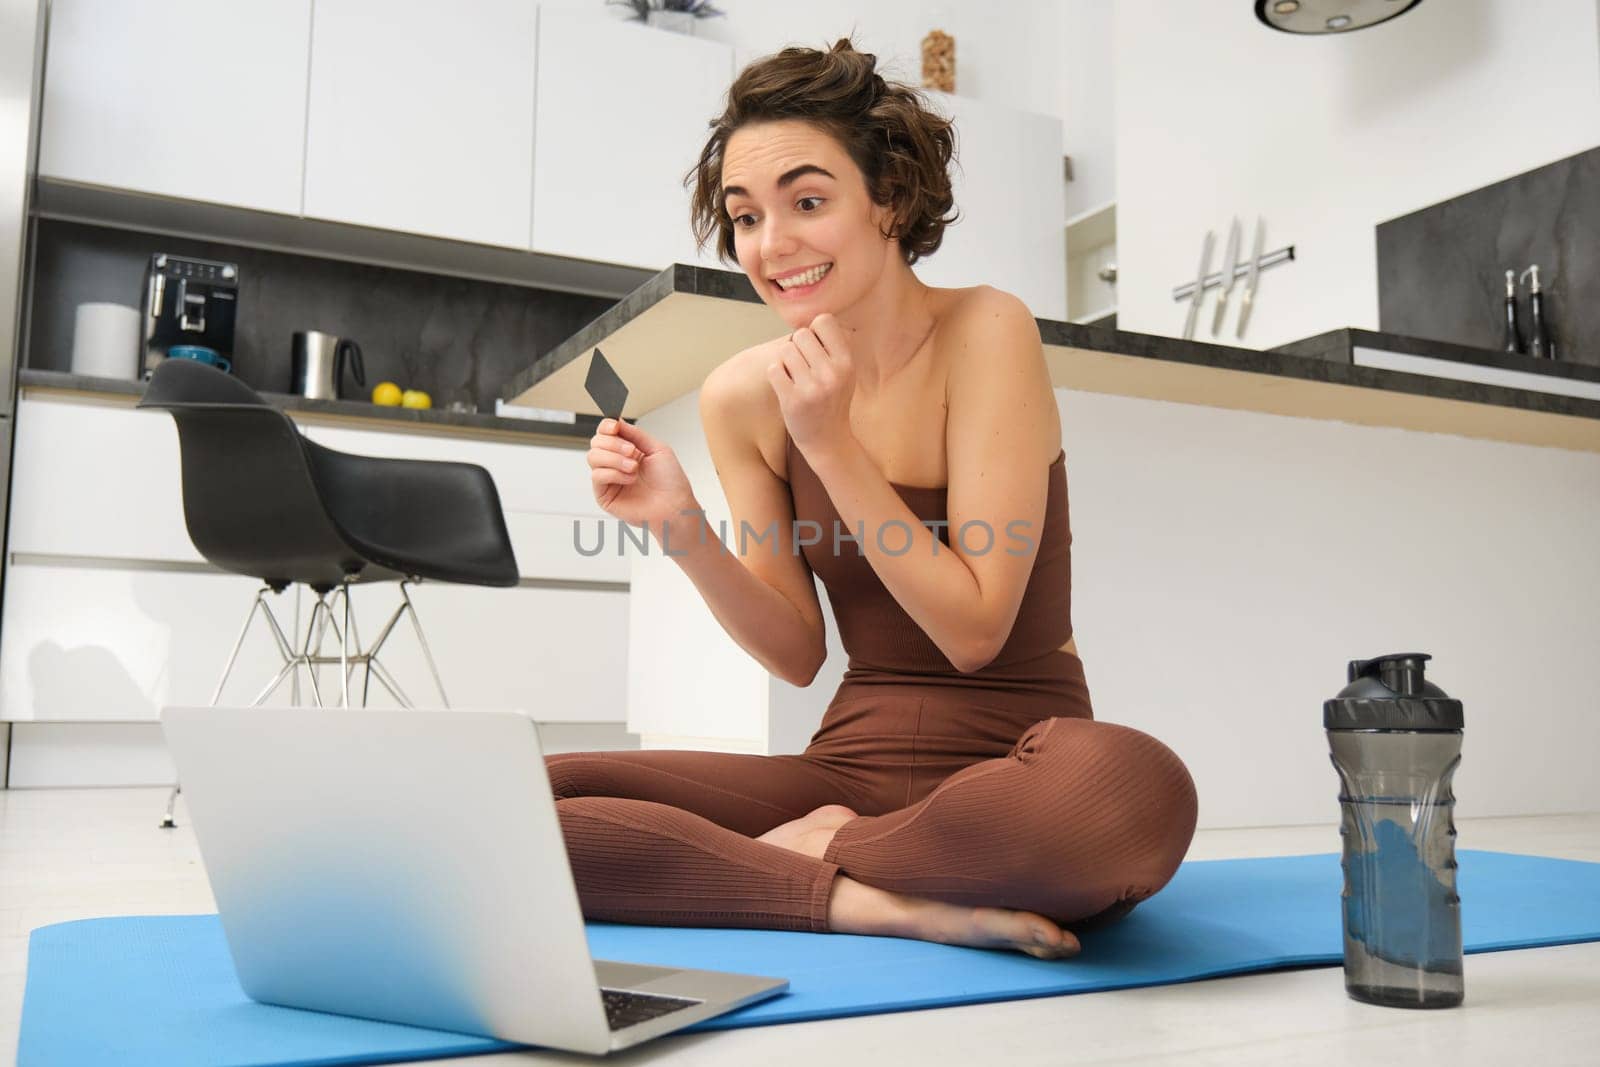 Portrait of young female athlete, yoga girl paying for online classes, purchasing remote training with gym instructor, sitting on her rubber mat with laptop and credit card.